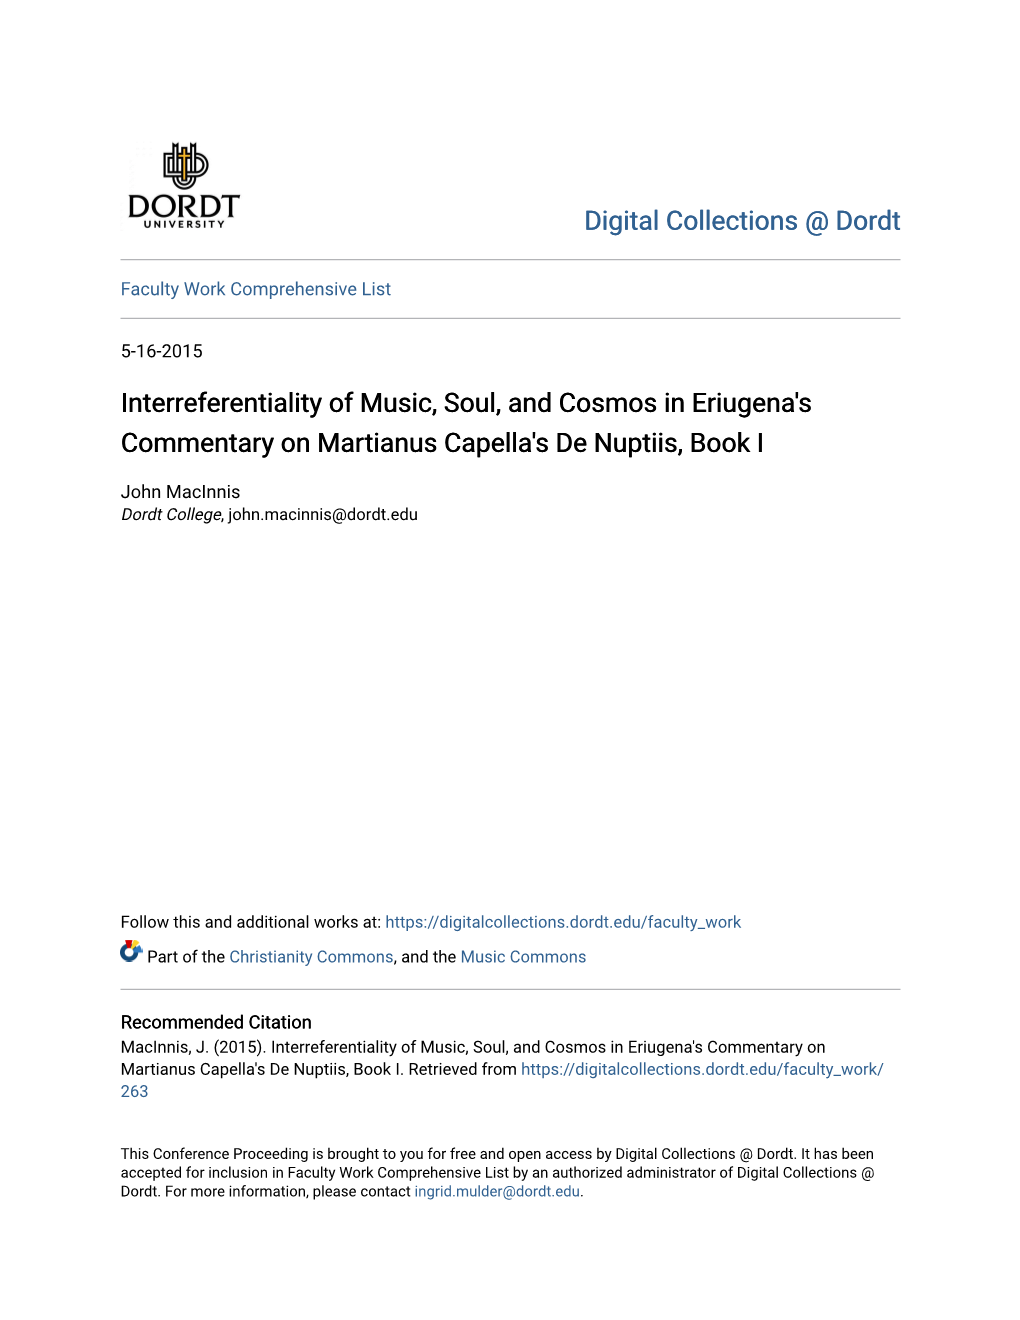 Interreferentiality of Music, Soul, and Cosmos in Eriugena's Commentary on Martianus Capella's De Nuptiis, Book I